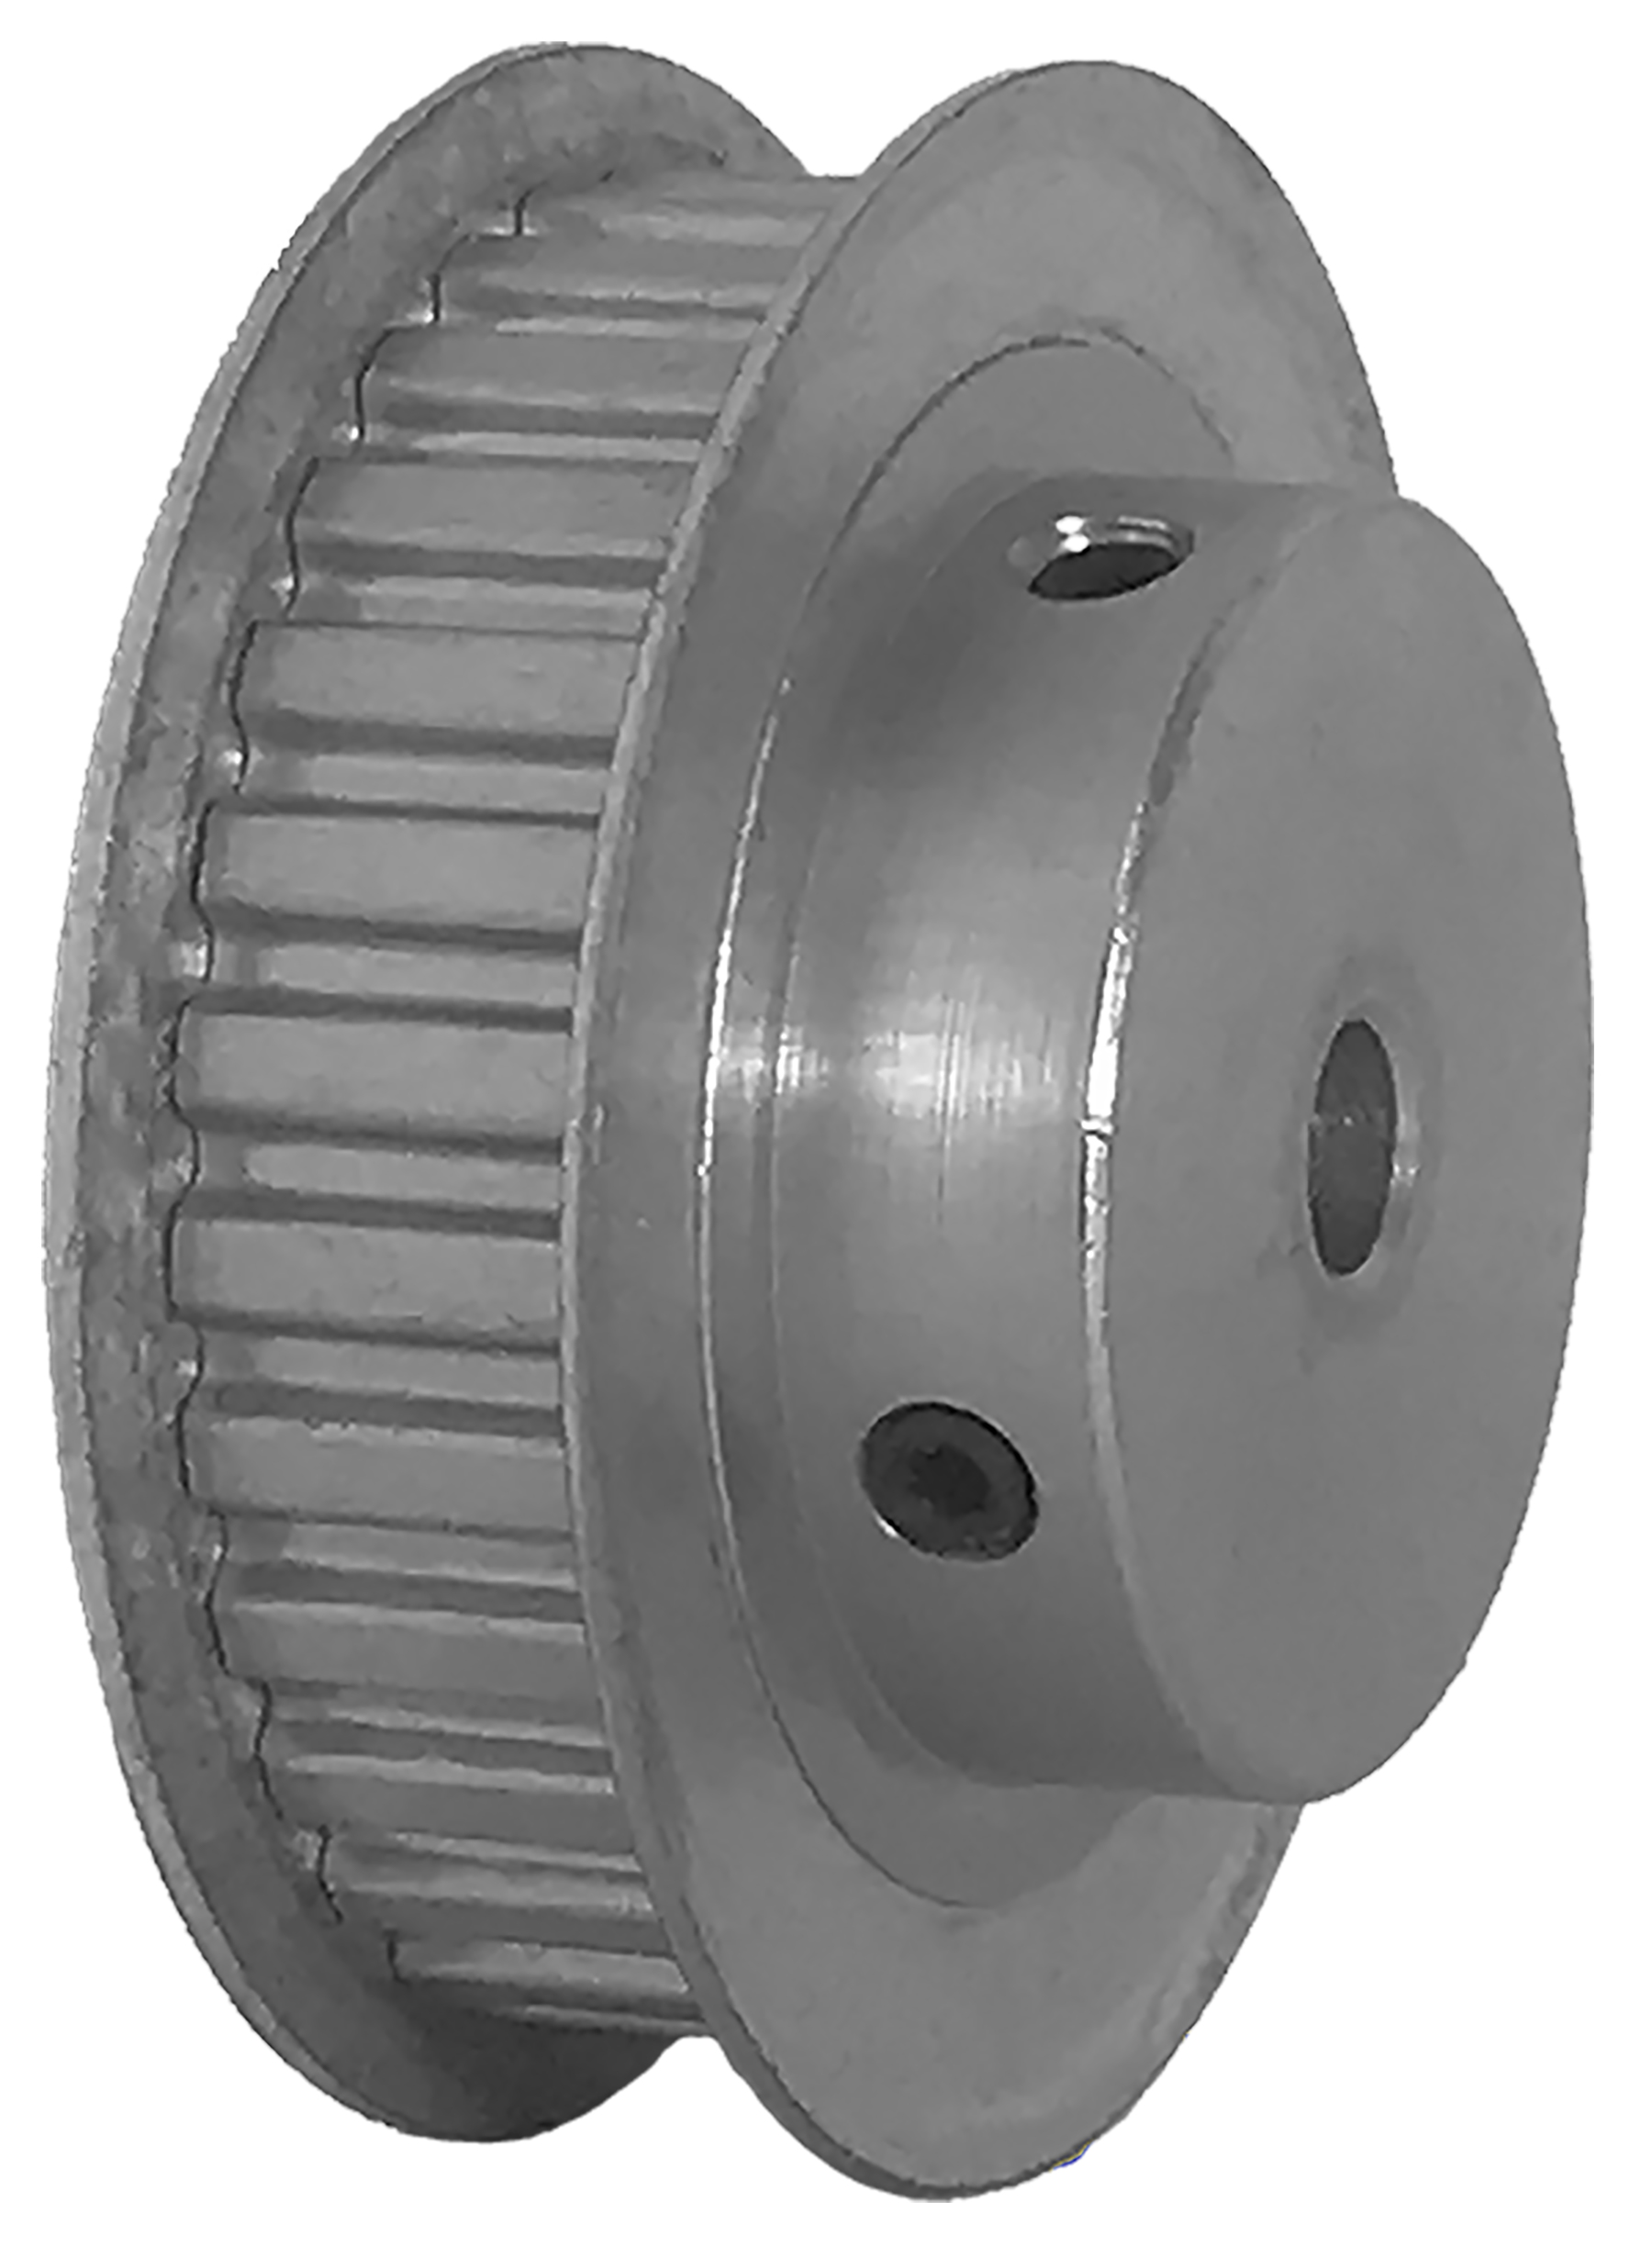 30XL037-6FA3 - Aluminum Imperial Pitch Pulleys